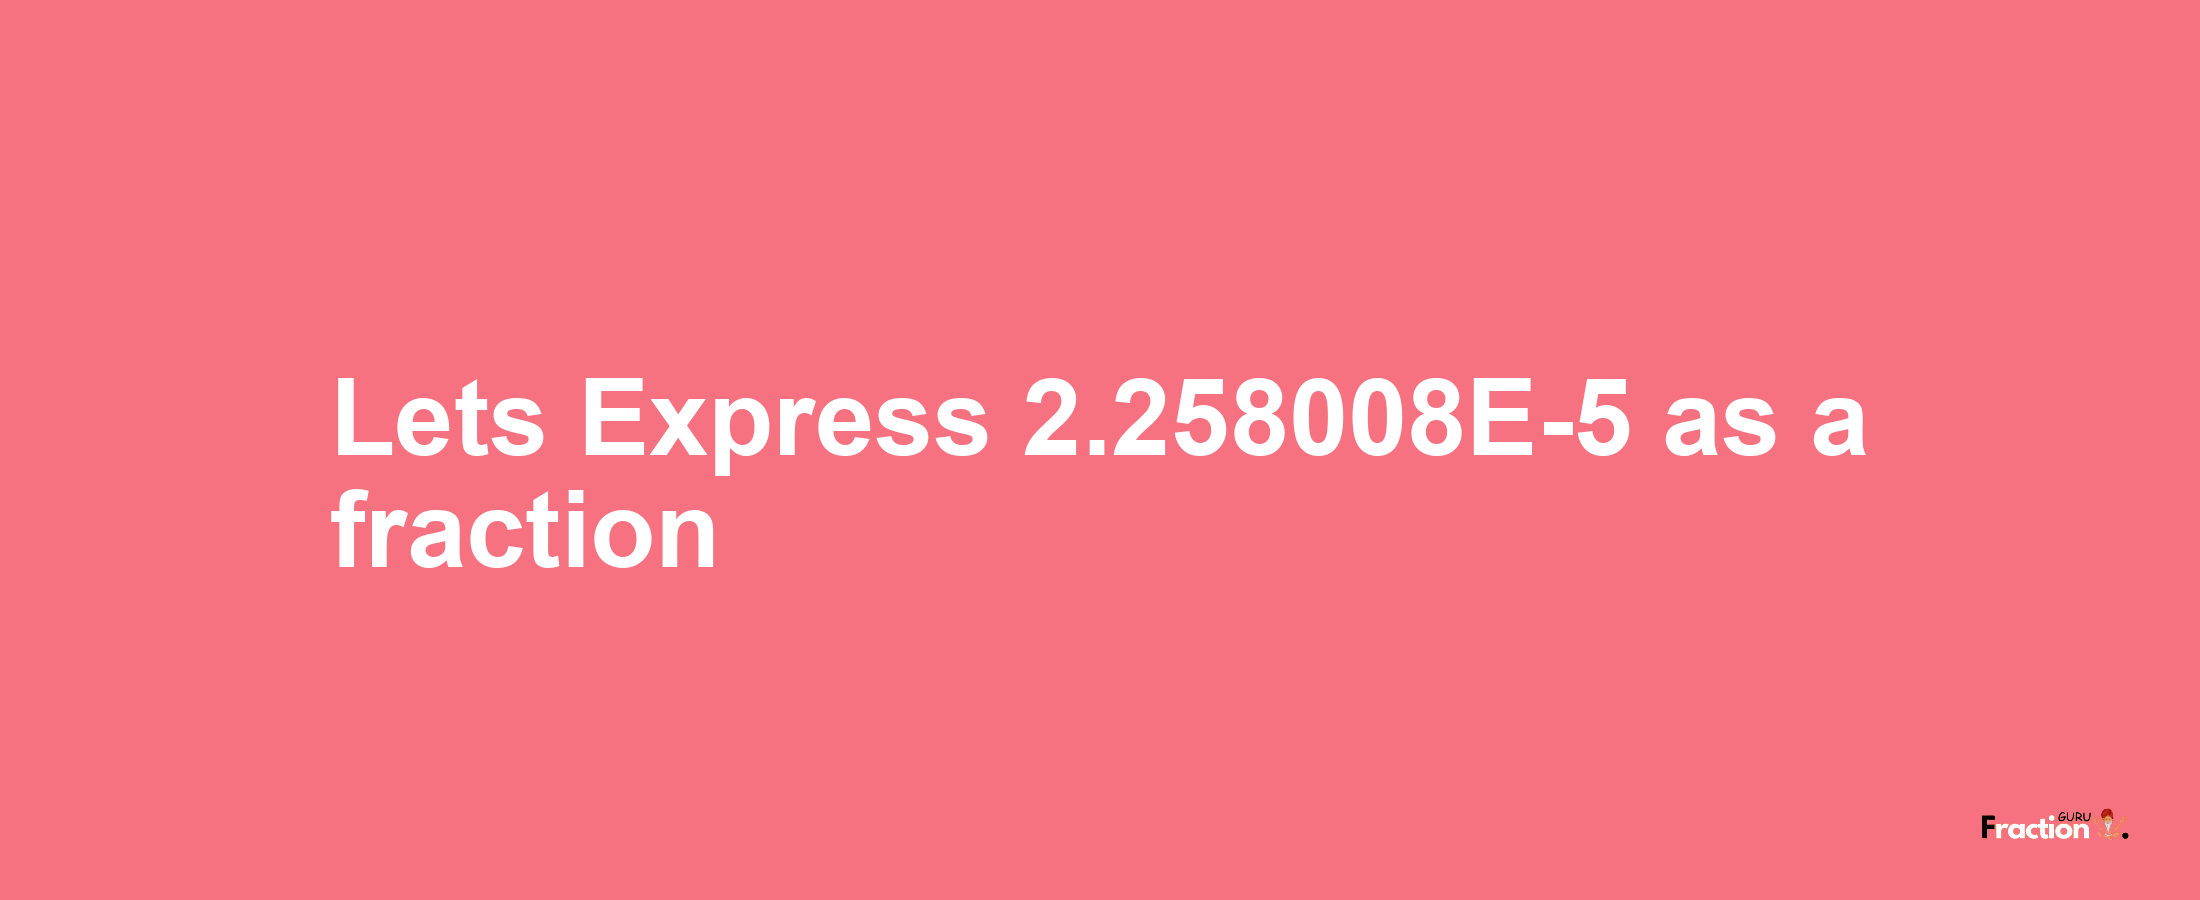 Lets Express 2.258008E-5 as afraction